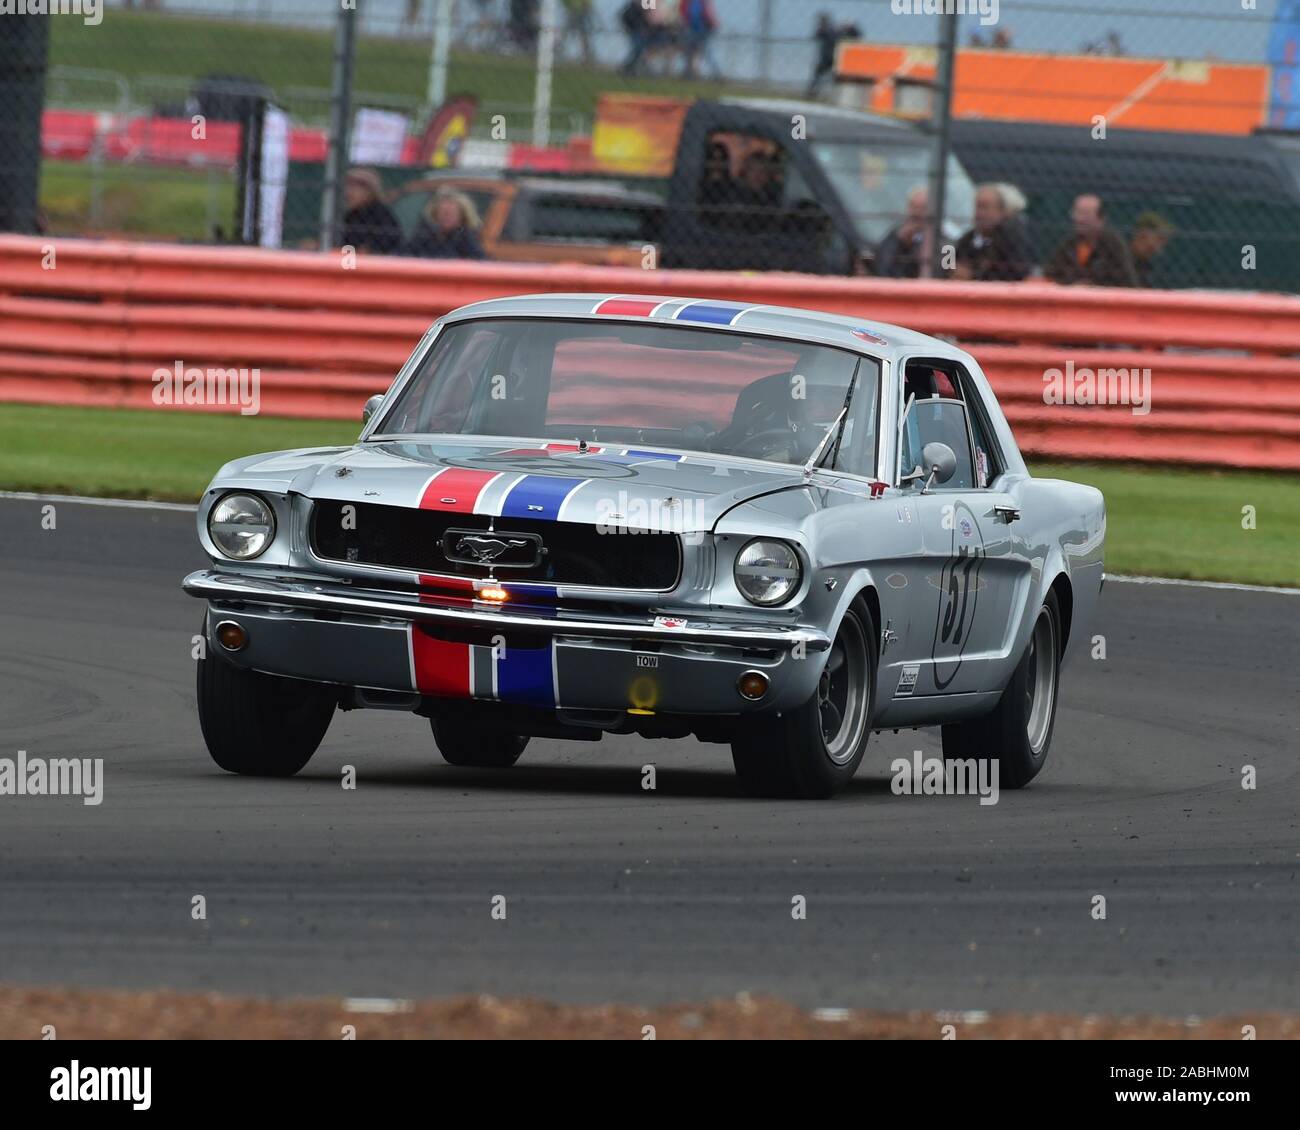 Nicholas King, Ford Mustang, Transatlantic Trophy for Pre '66 Touring Cars, Silverstone Classic, July 2019, Silverstone, Northamptonshire, England, ci Stock Photo